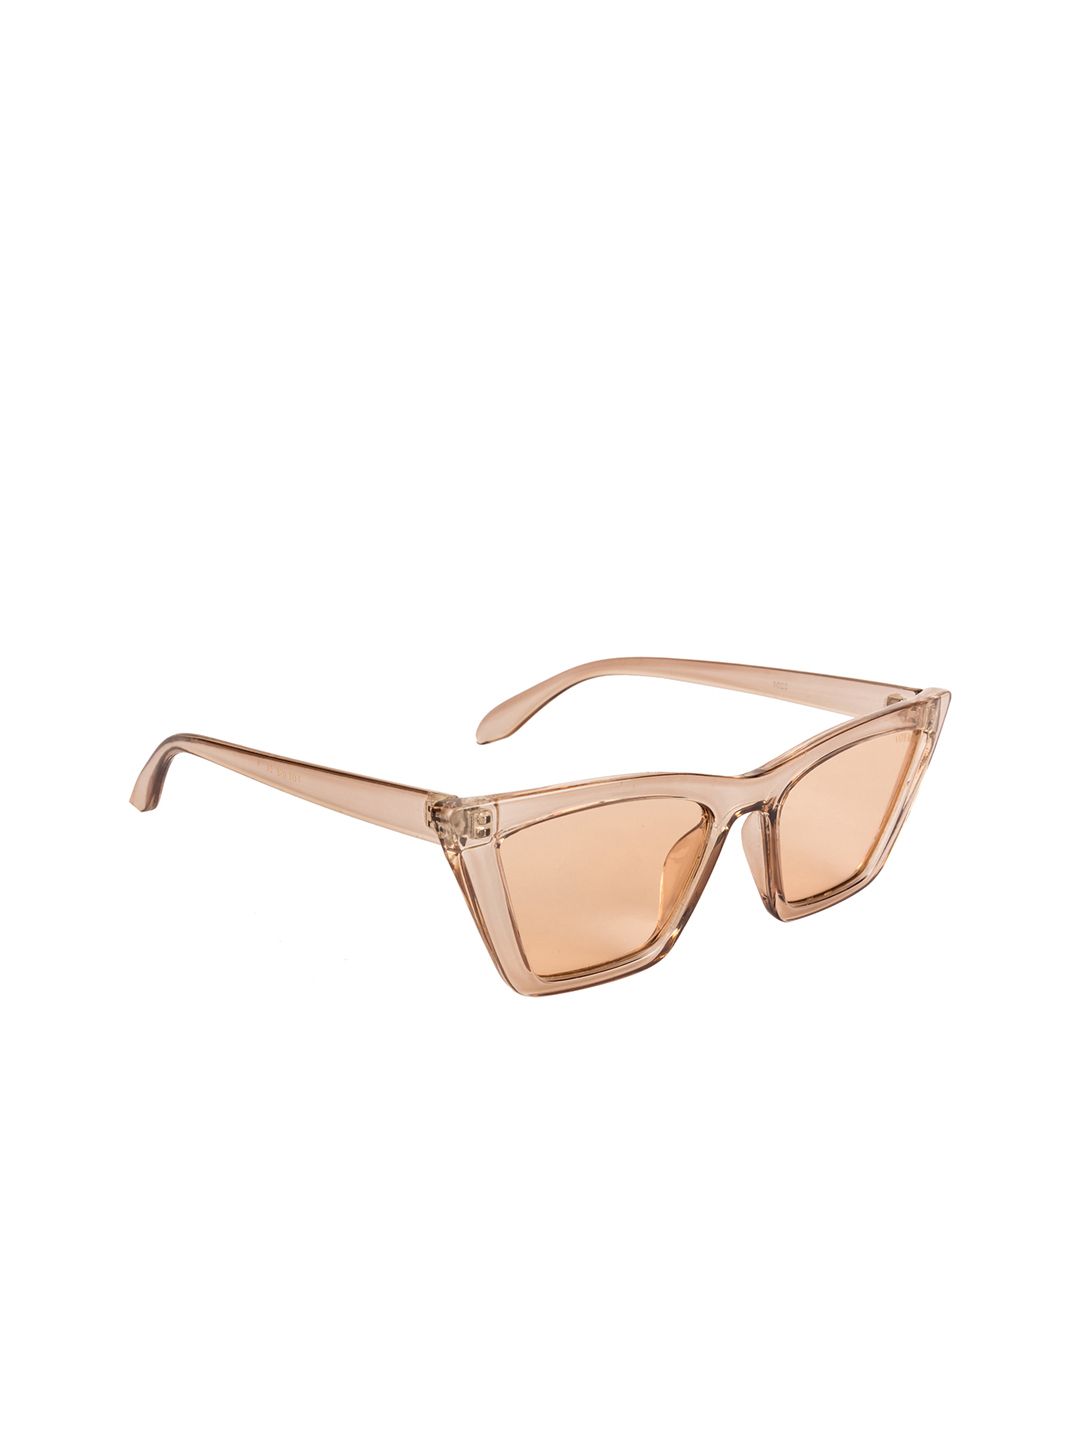 Voyage Women Cateye UV Protected Sunglasses 1020MG3297 Price in India